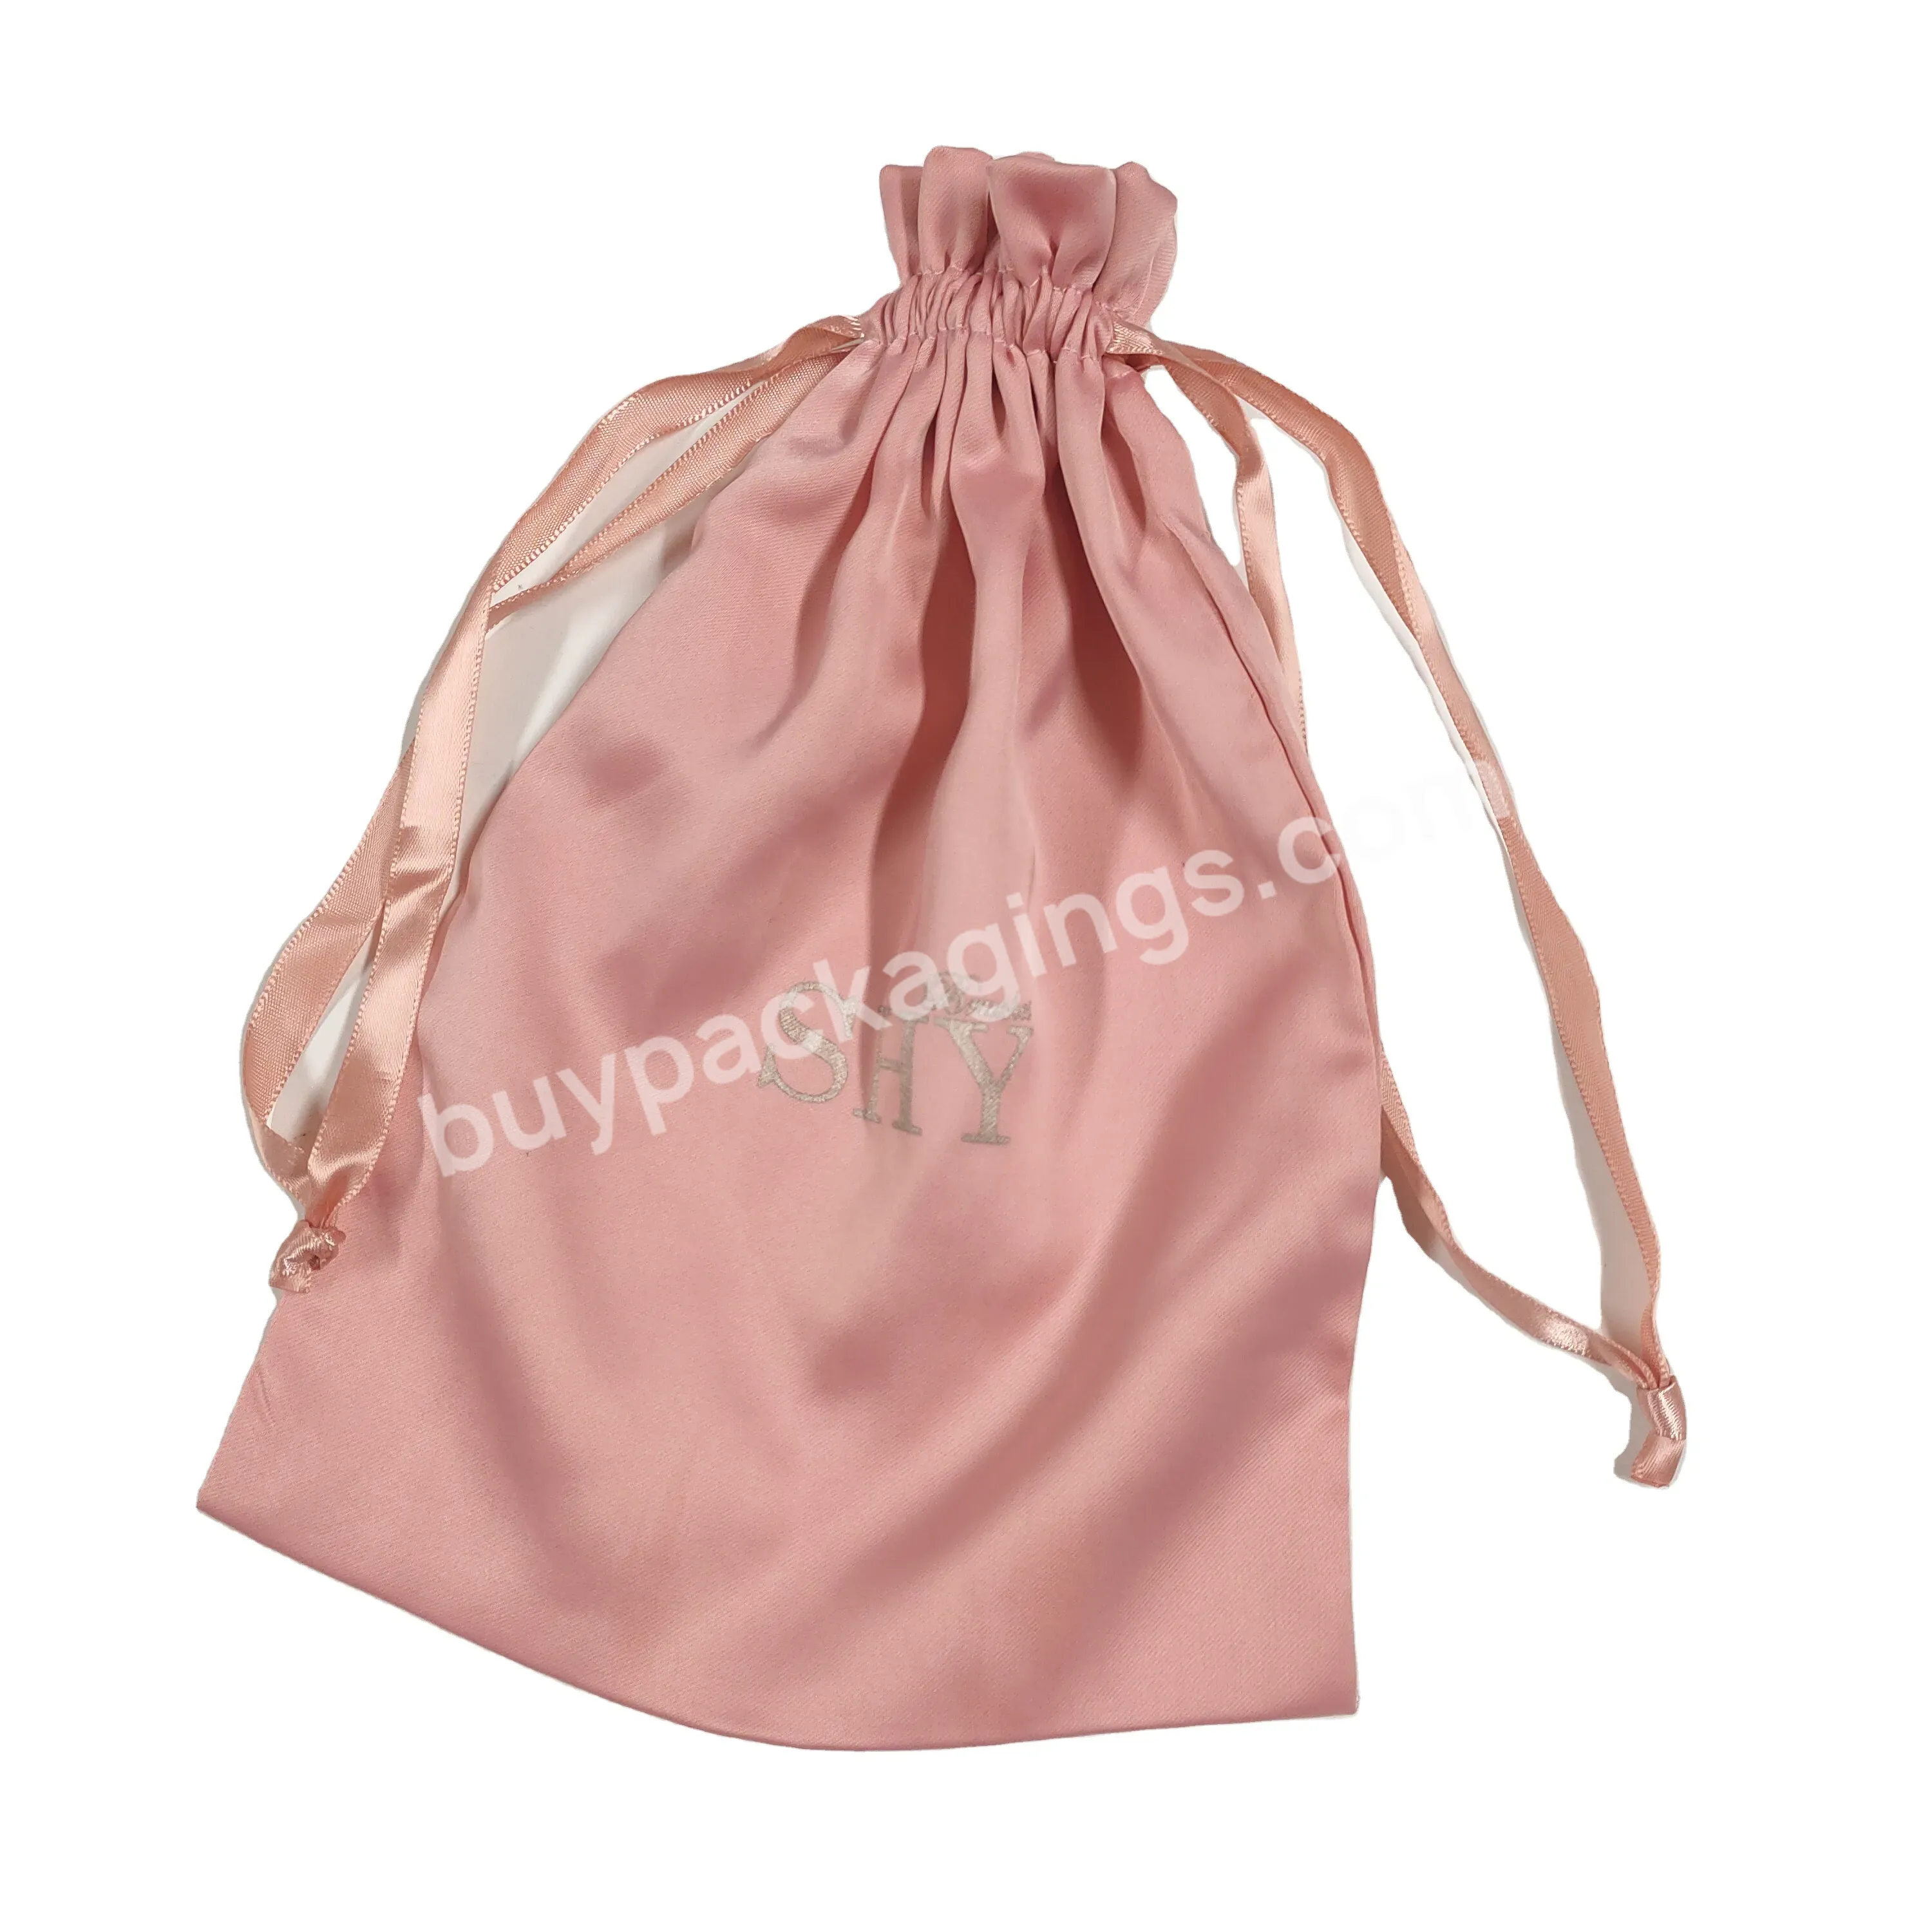 Custom Full Cotton Jewelry Bags With Company Logo Dust Bags - Buy Jewelry Bags,Custom Jewelry Dust Bags,Custom Made Jewelry Bags.